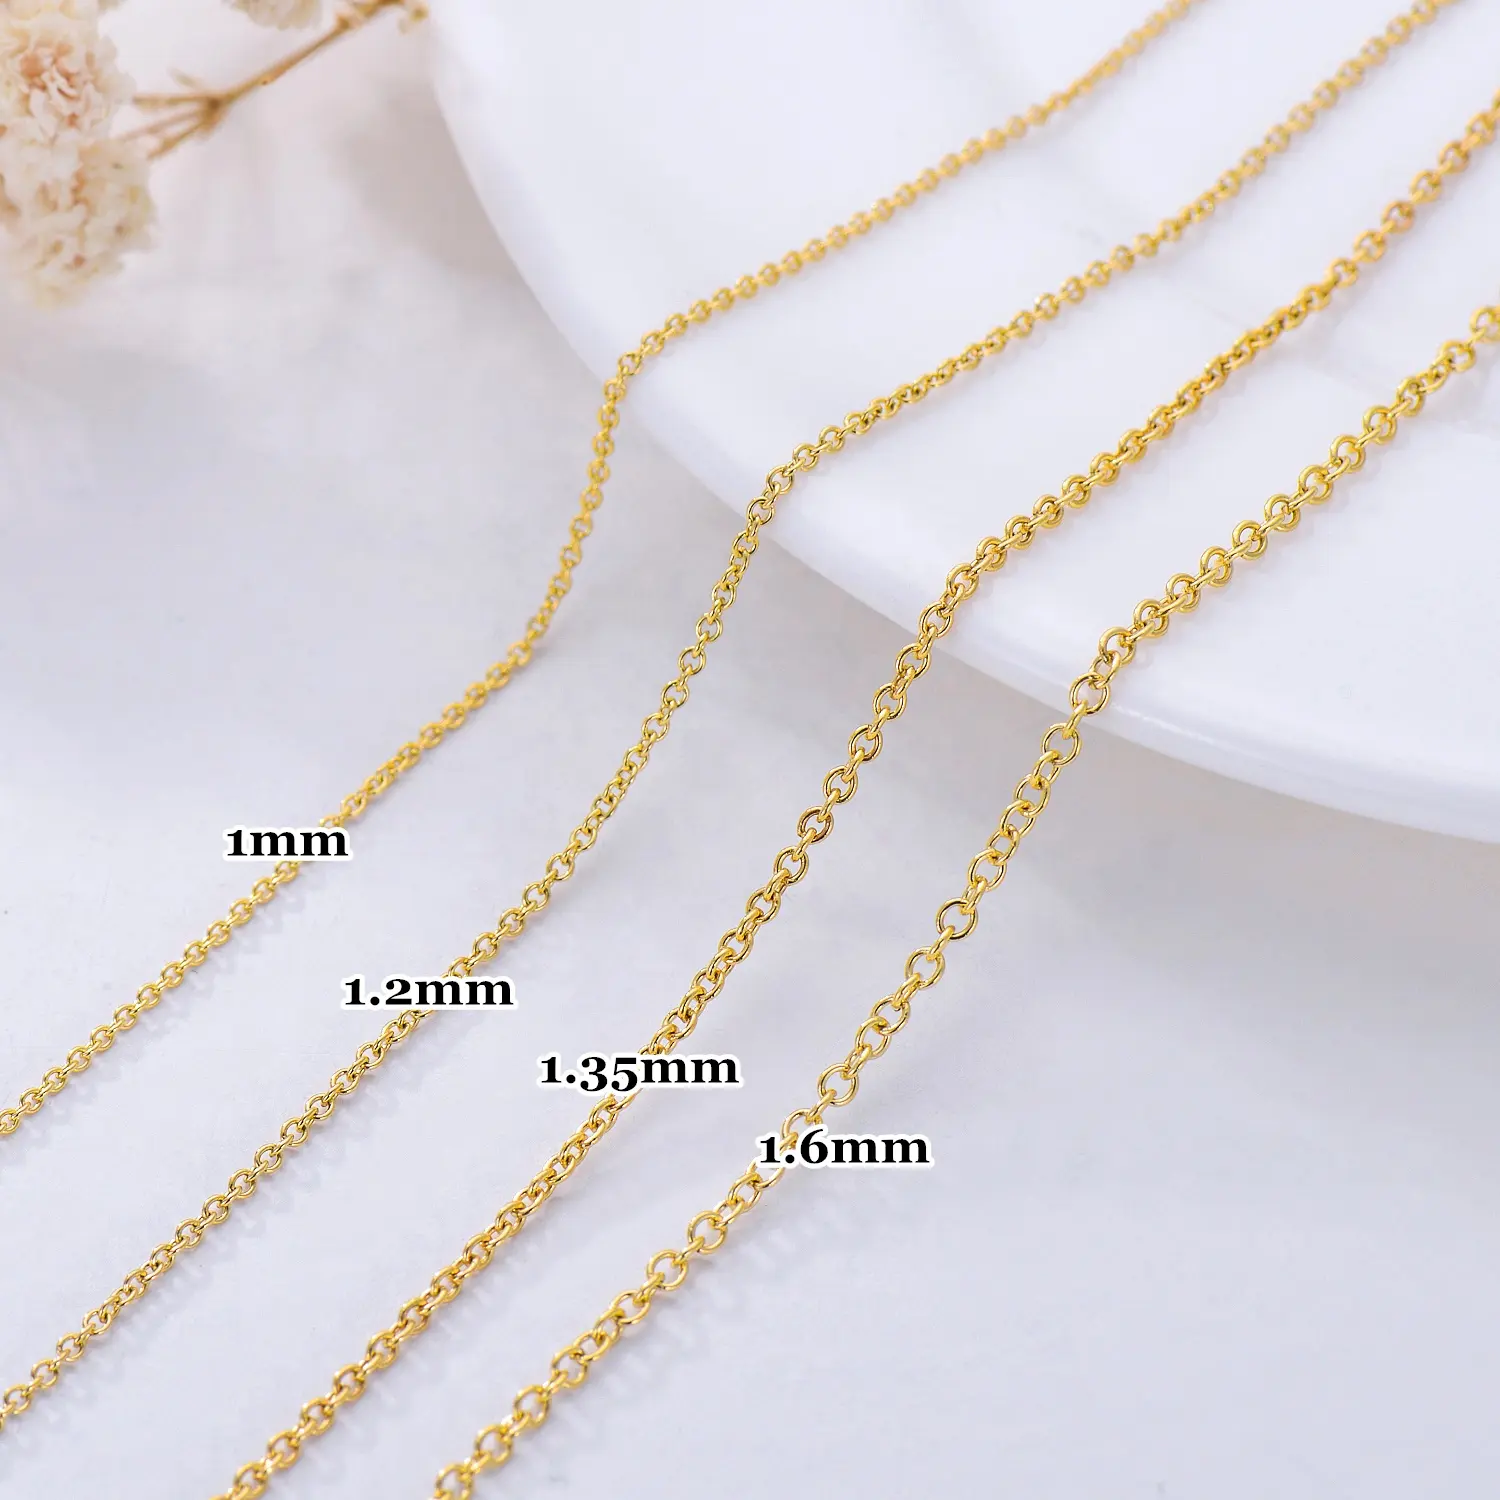 1mm 1.2mm 1.35mm 1.6mm Durable Strong Solid 14k Gold Chain Necklace With Spring Clasp Jewelry Making Necklace